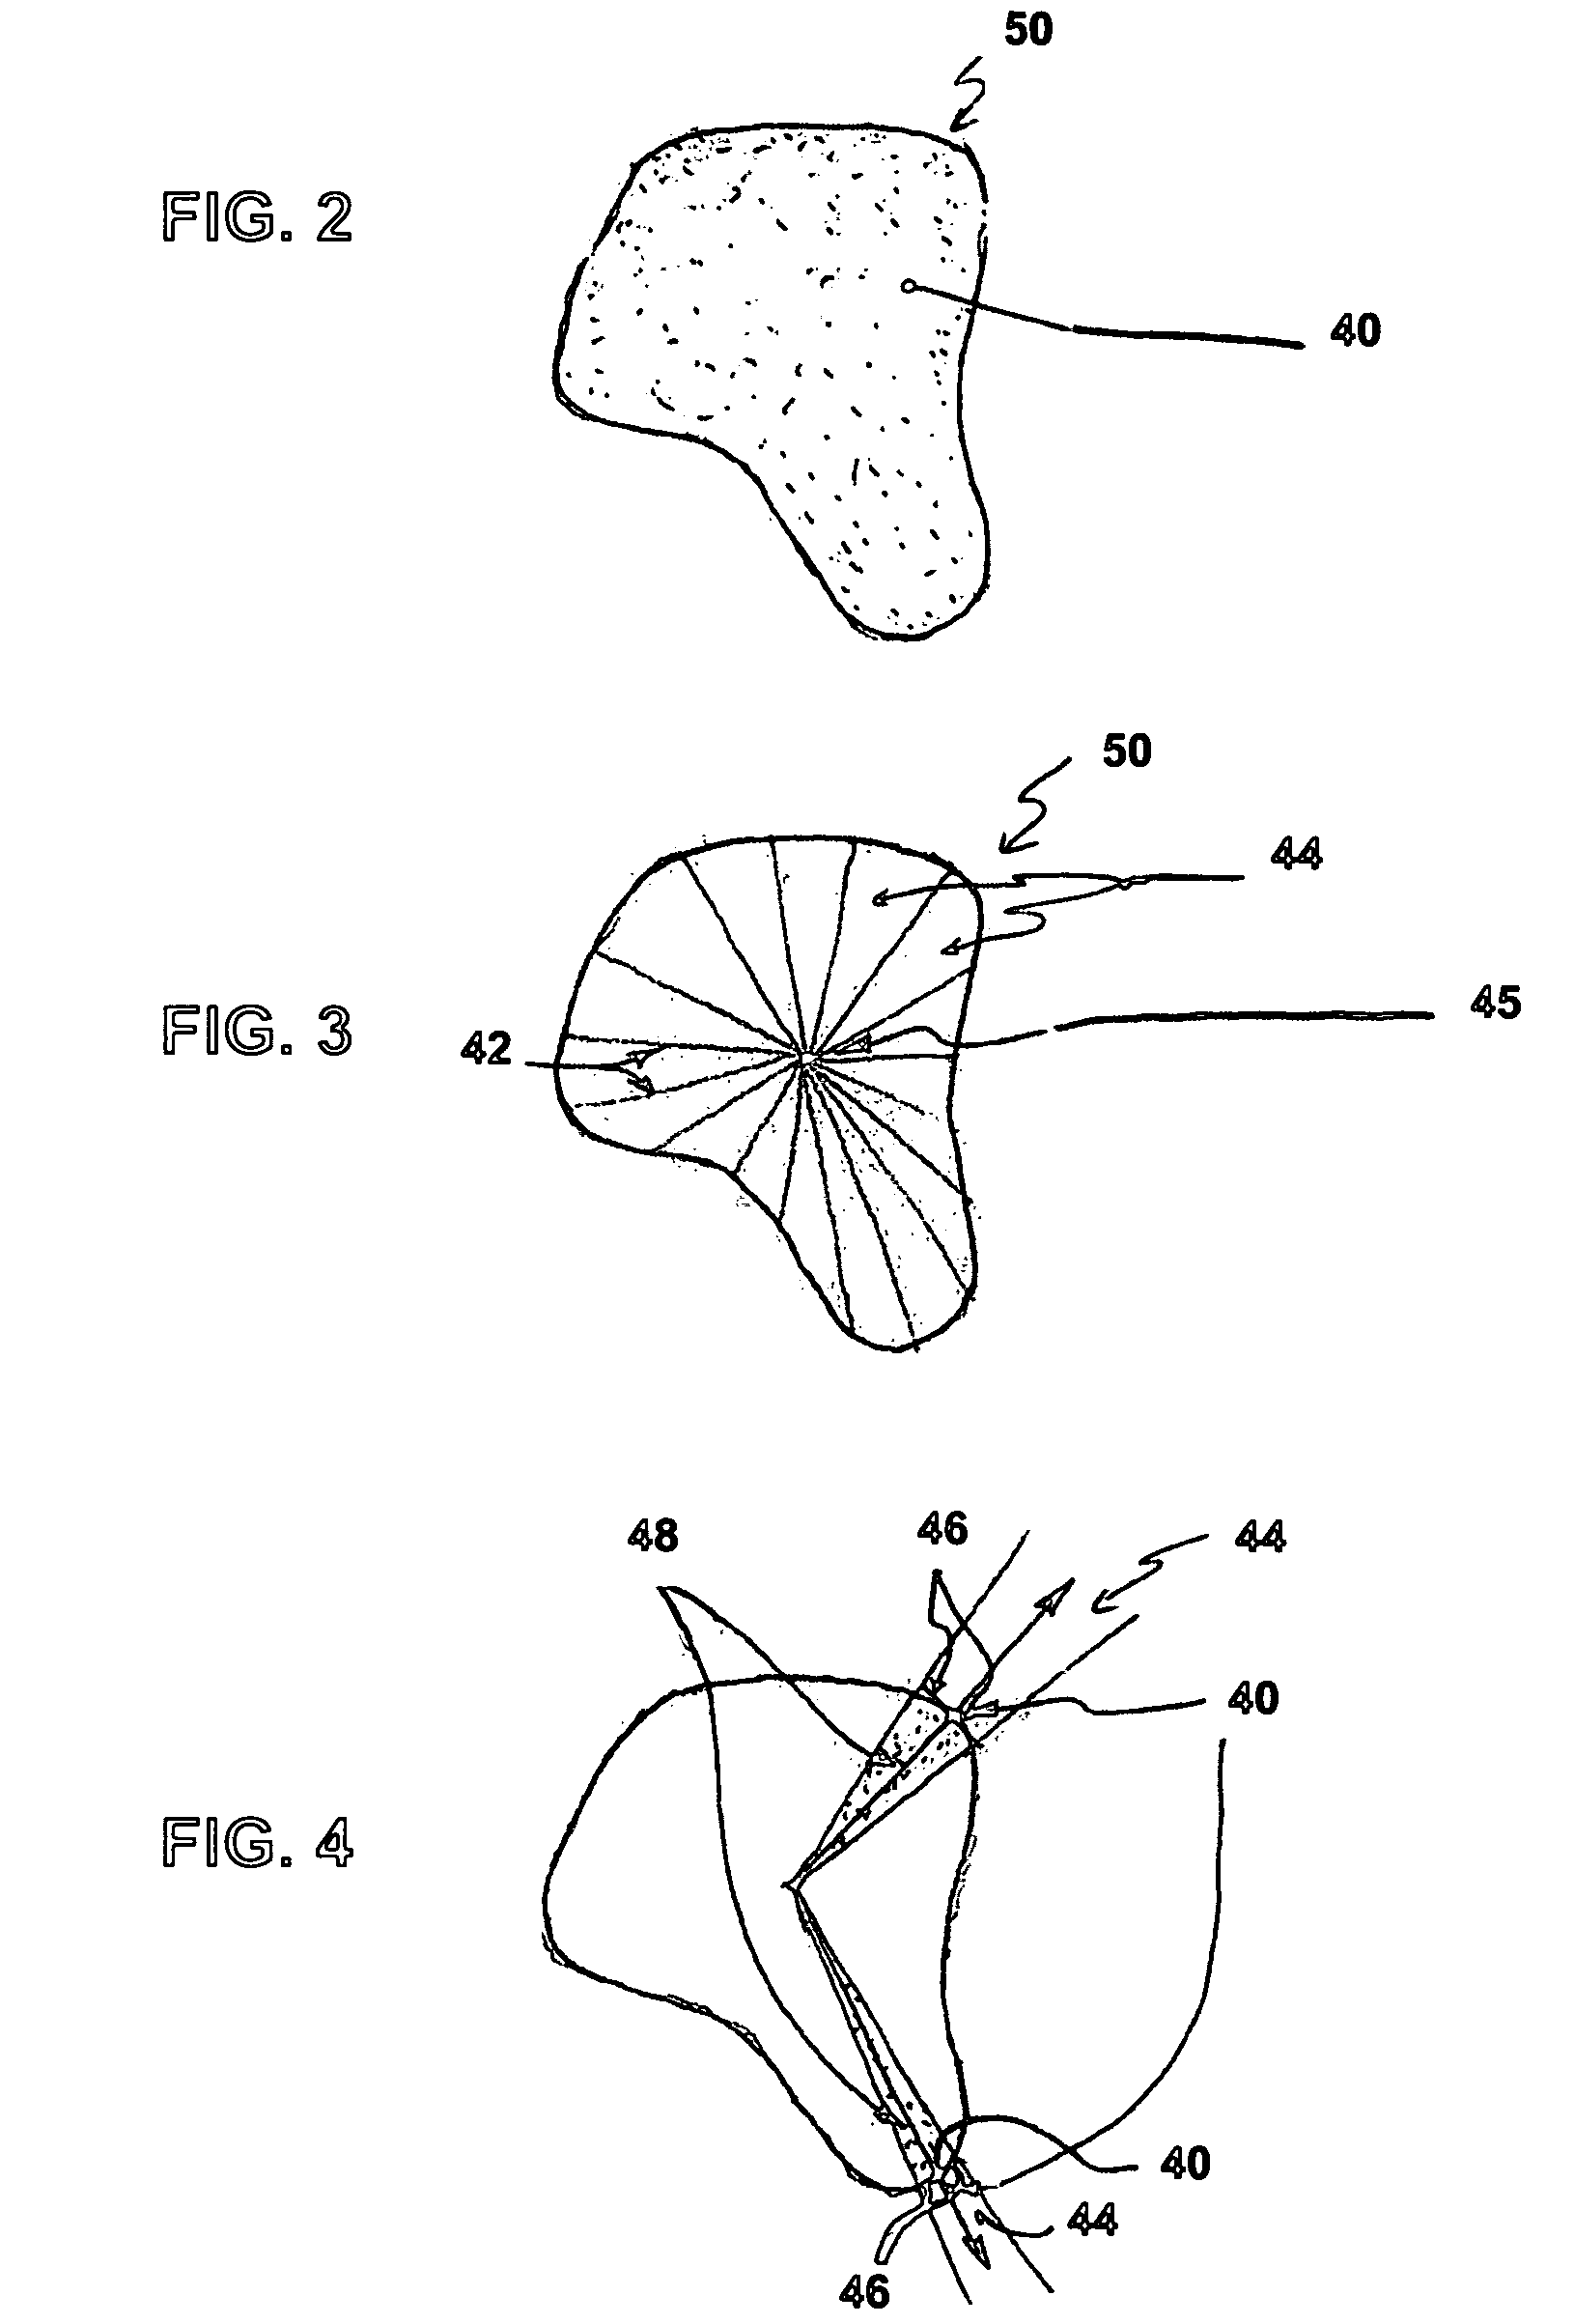 System and method for complex geometry modeling of anatomy using multiple surface models